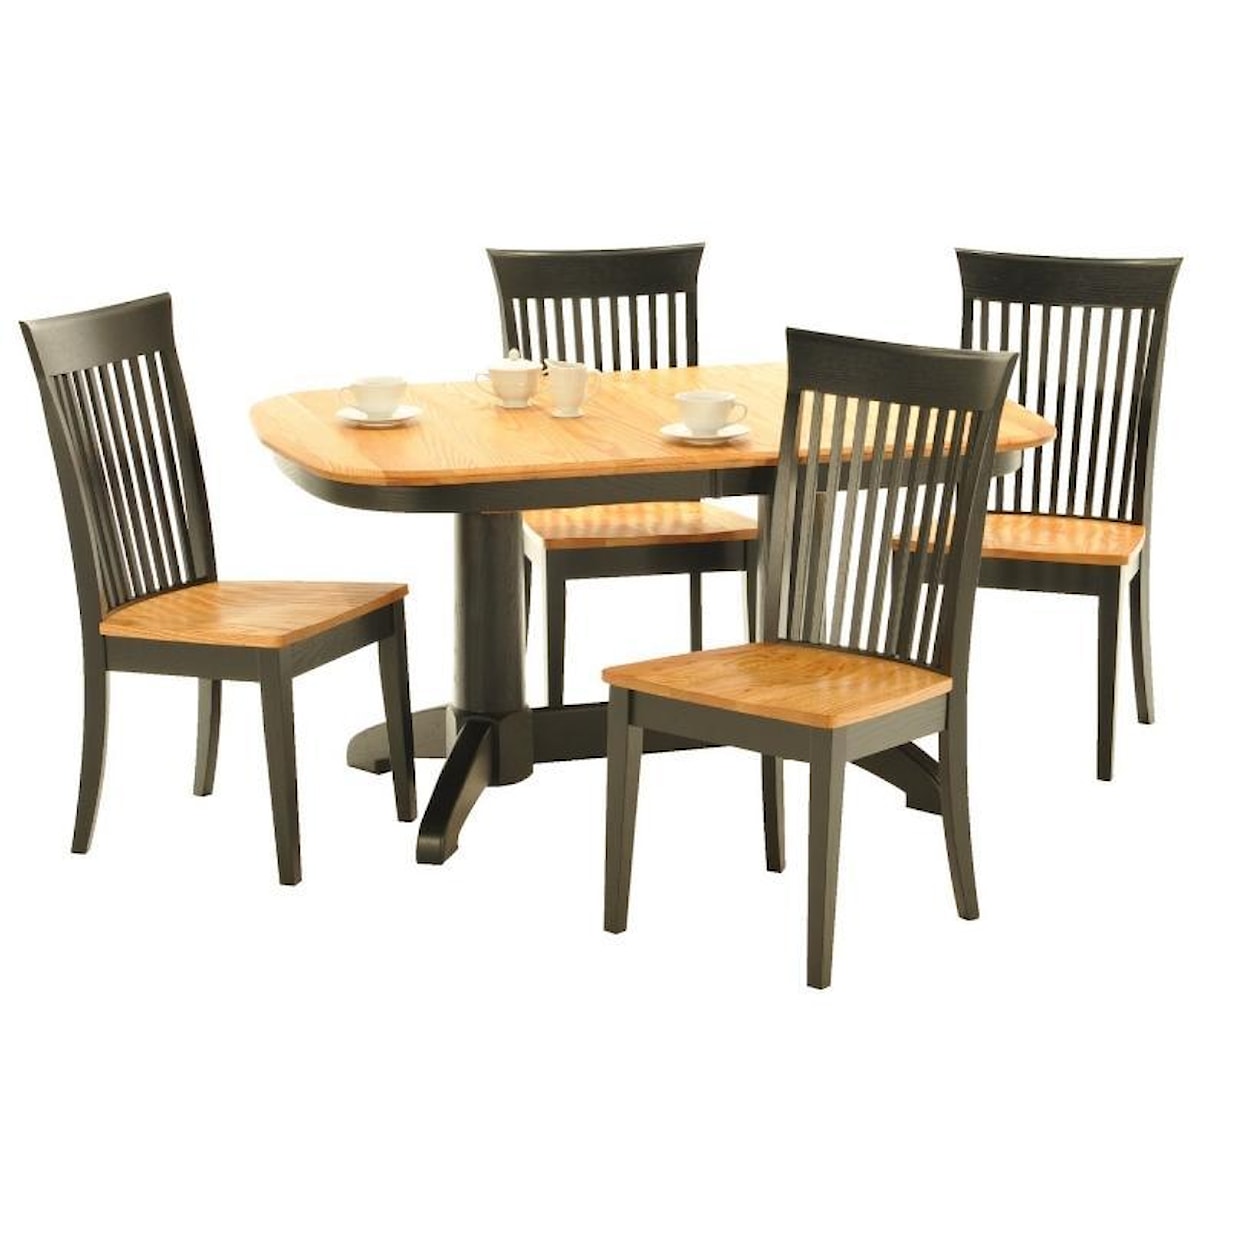 L.J. Gascho Furniture Split Rock Dining Table and Slated Chair Group